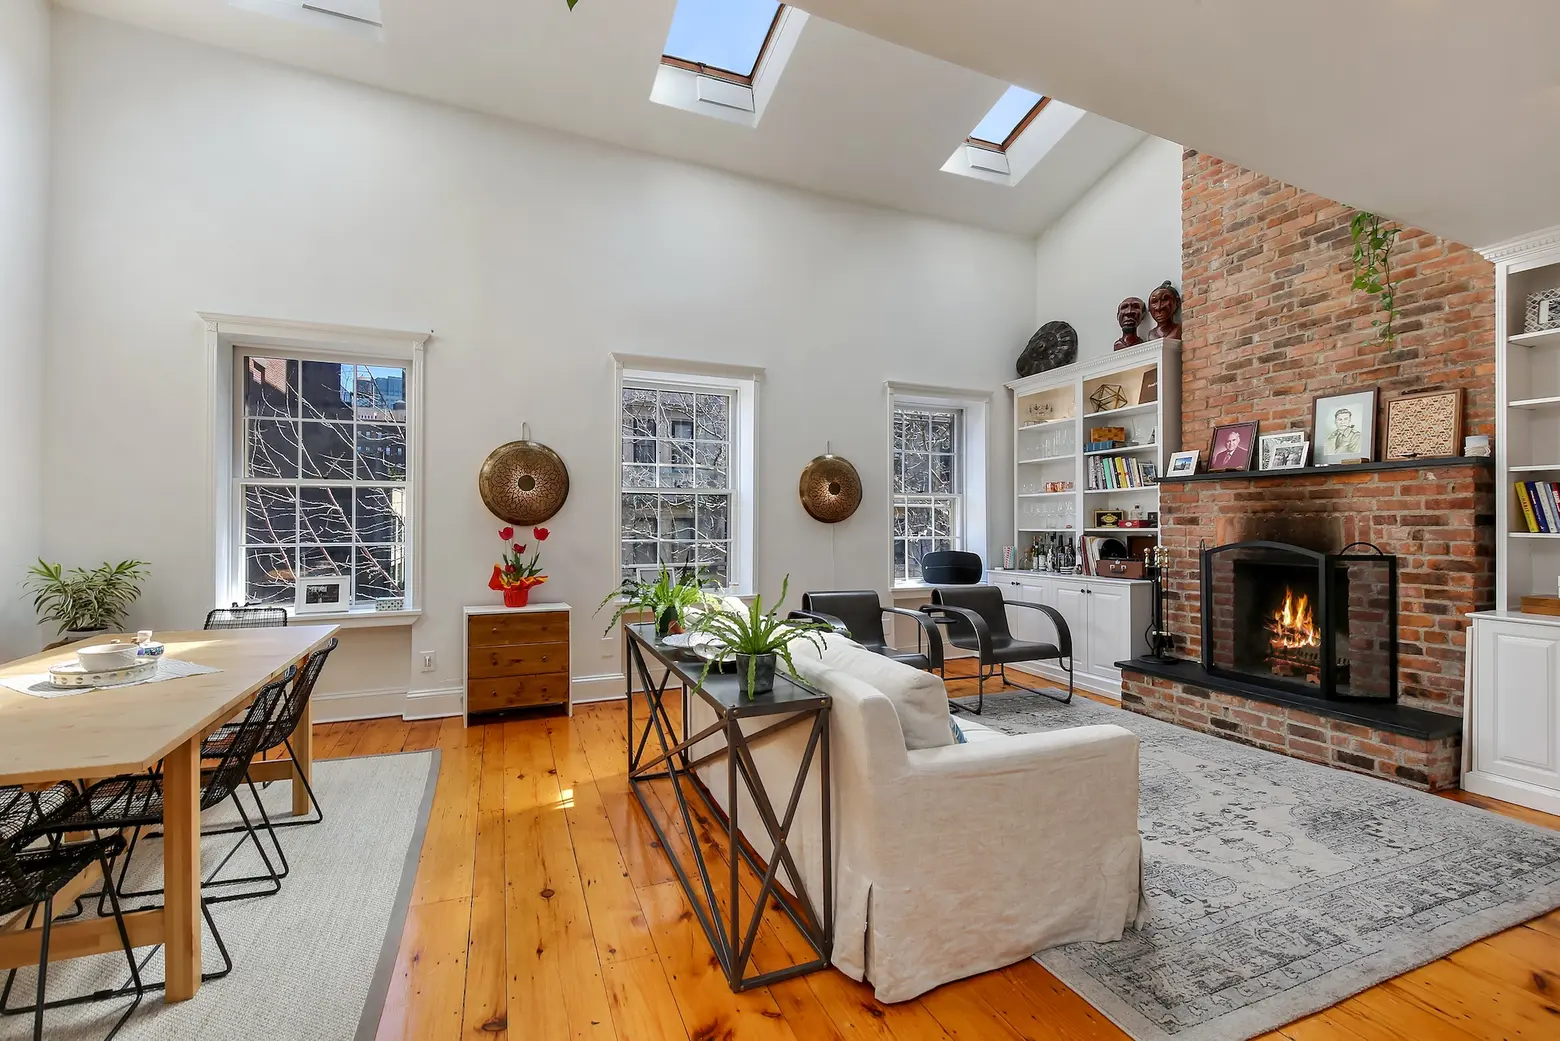 $2.3M duplex in a Brooklyn Heights brownstone has two outdoor spaces and three fireplaces